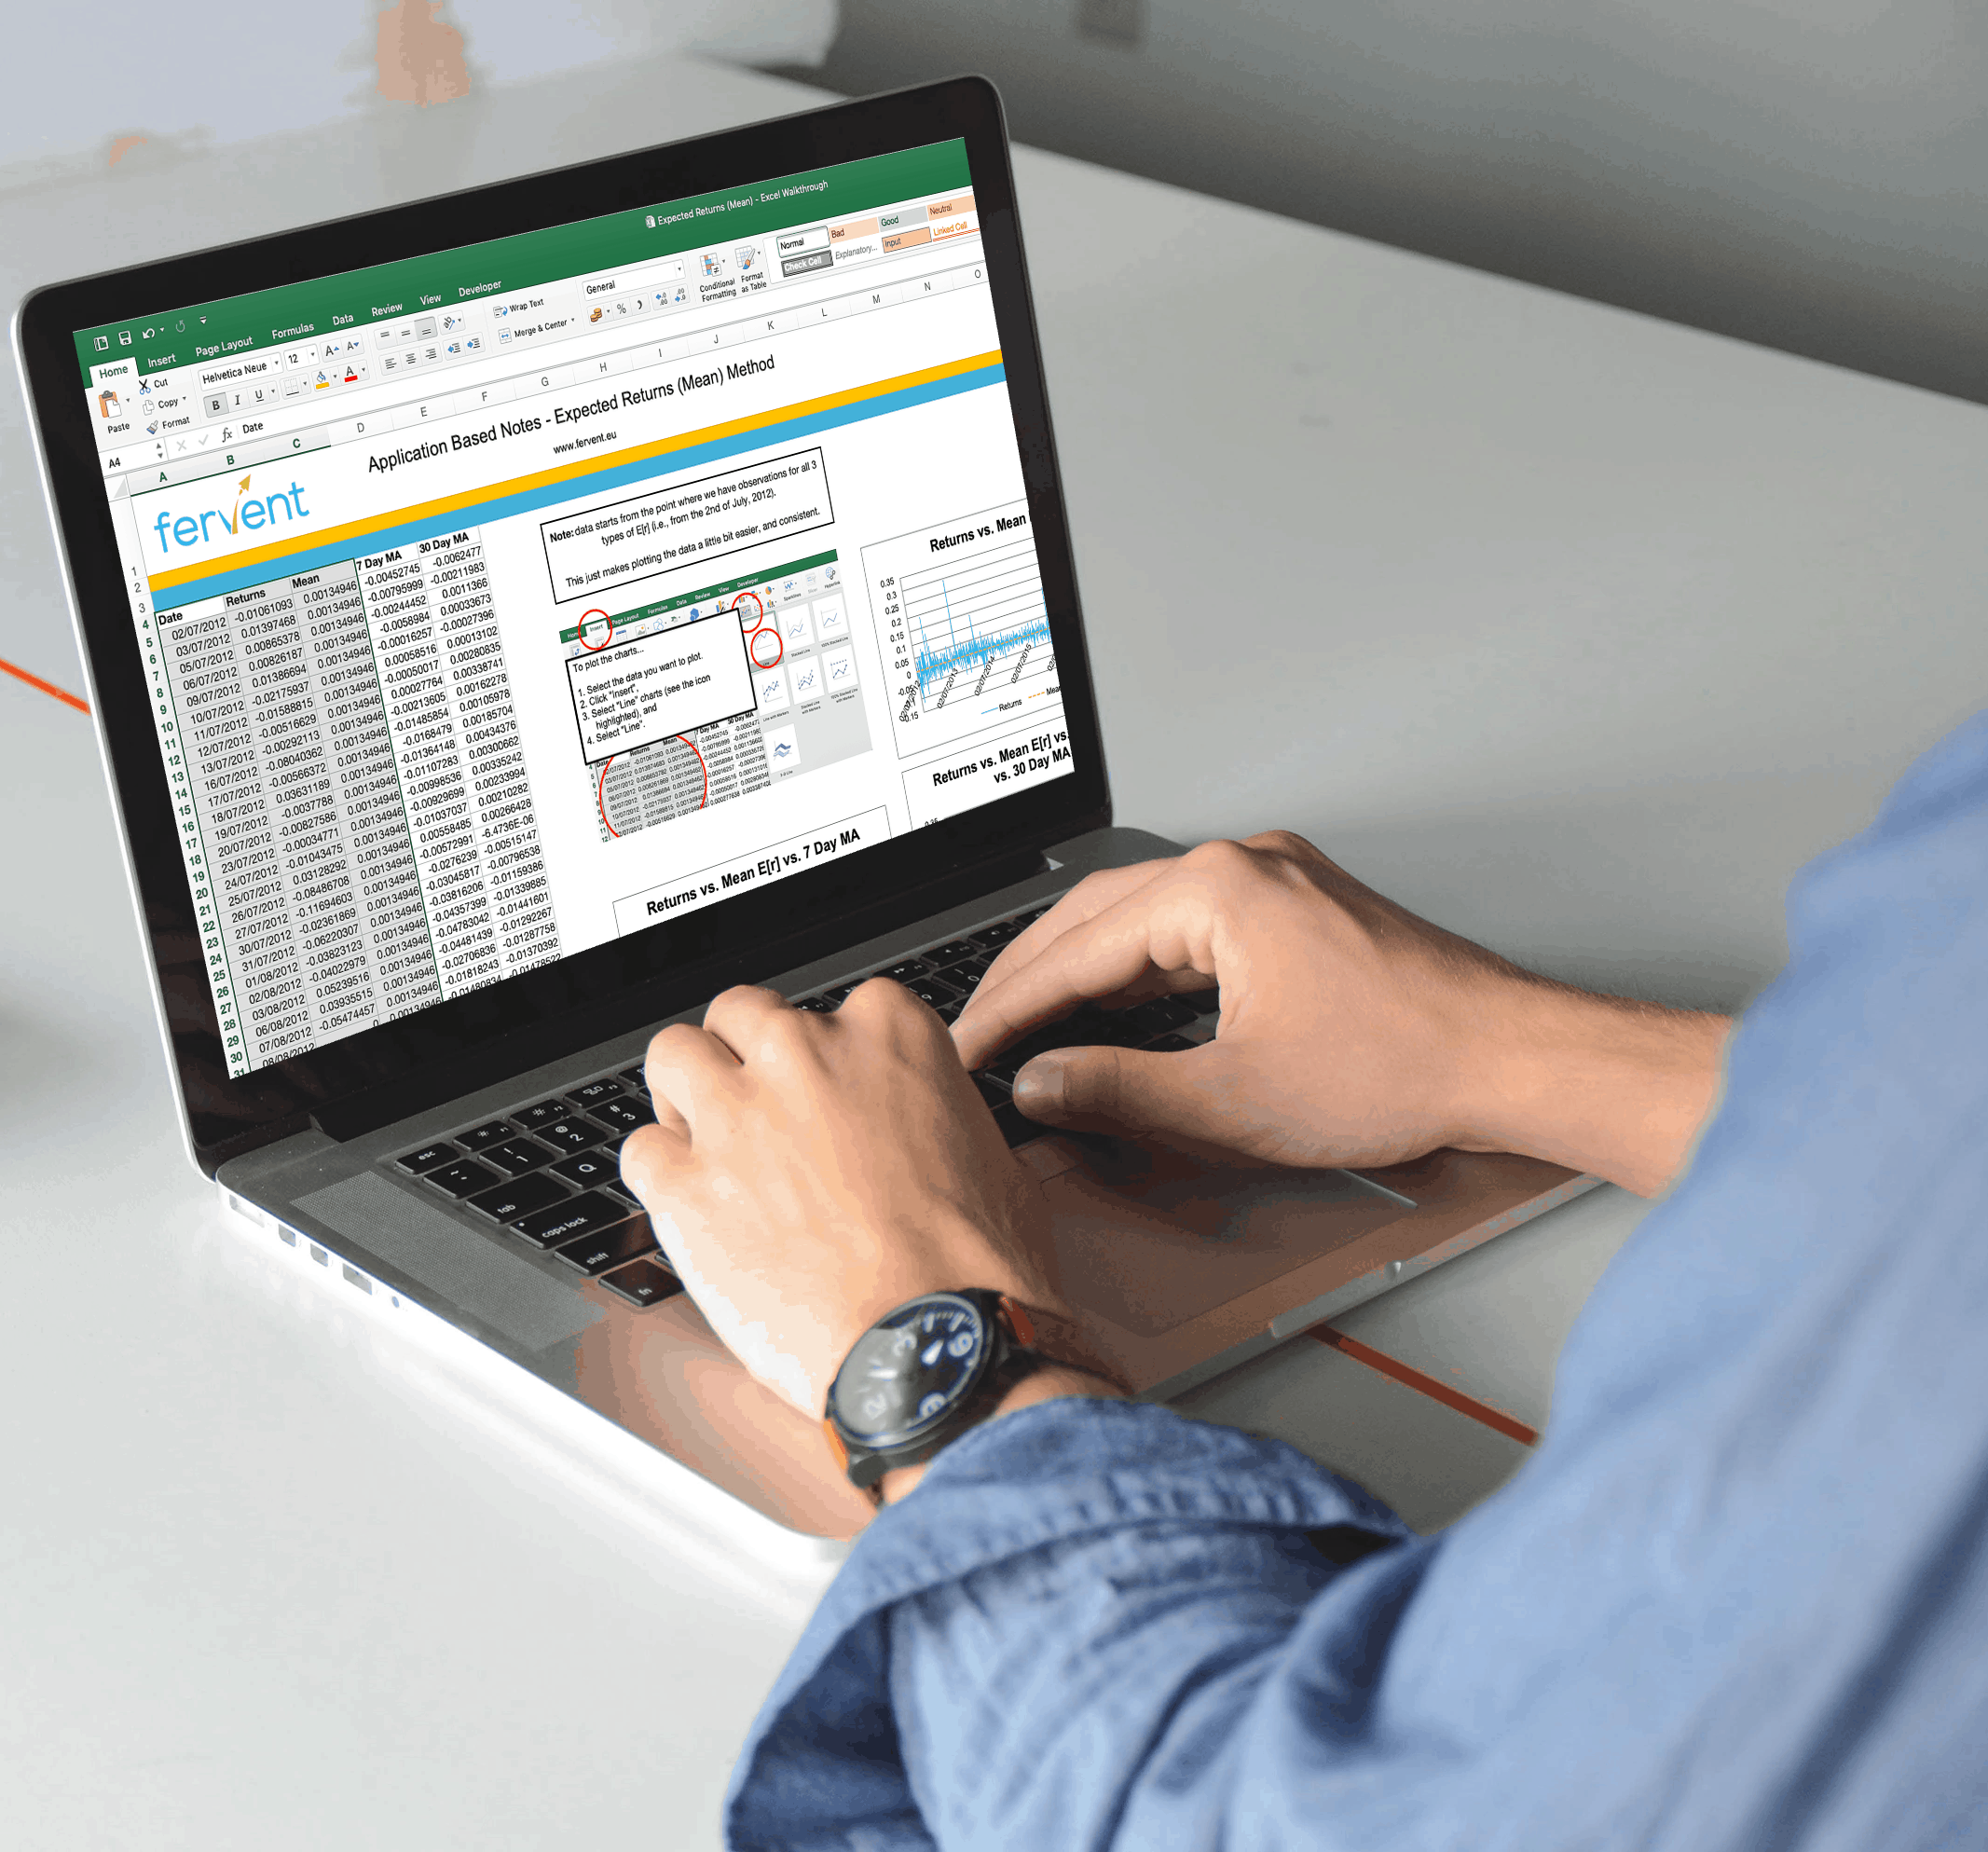 learning excel 2016 on a mac is worthless for finance